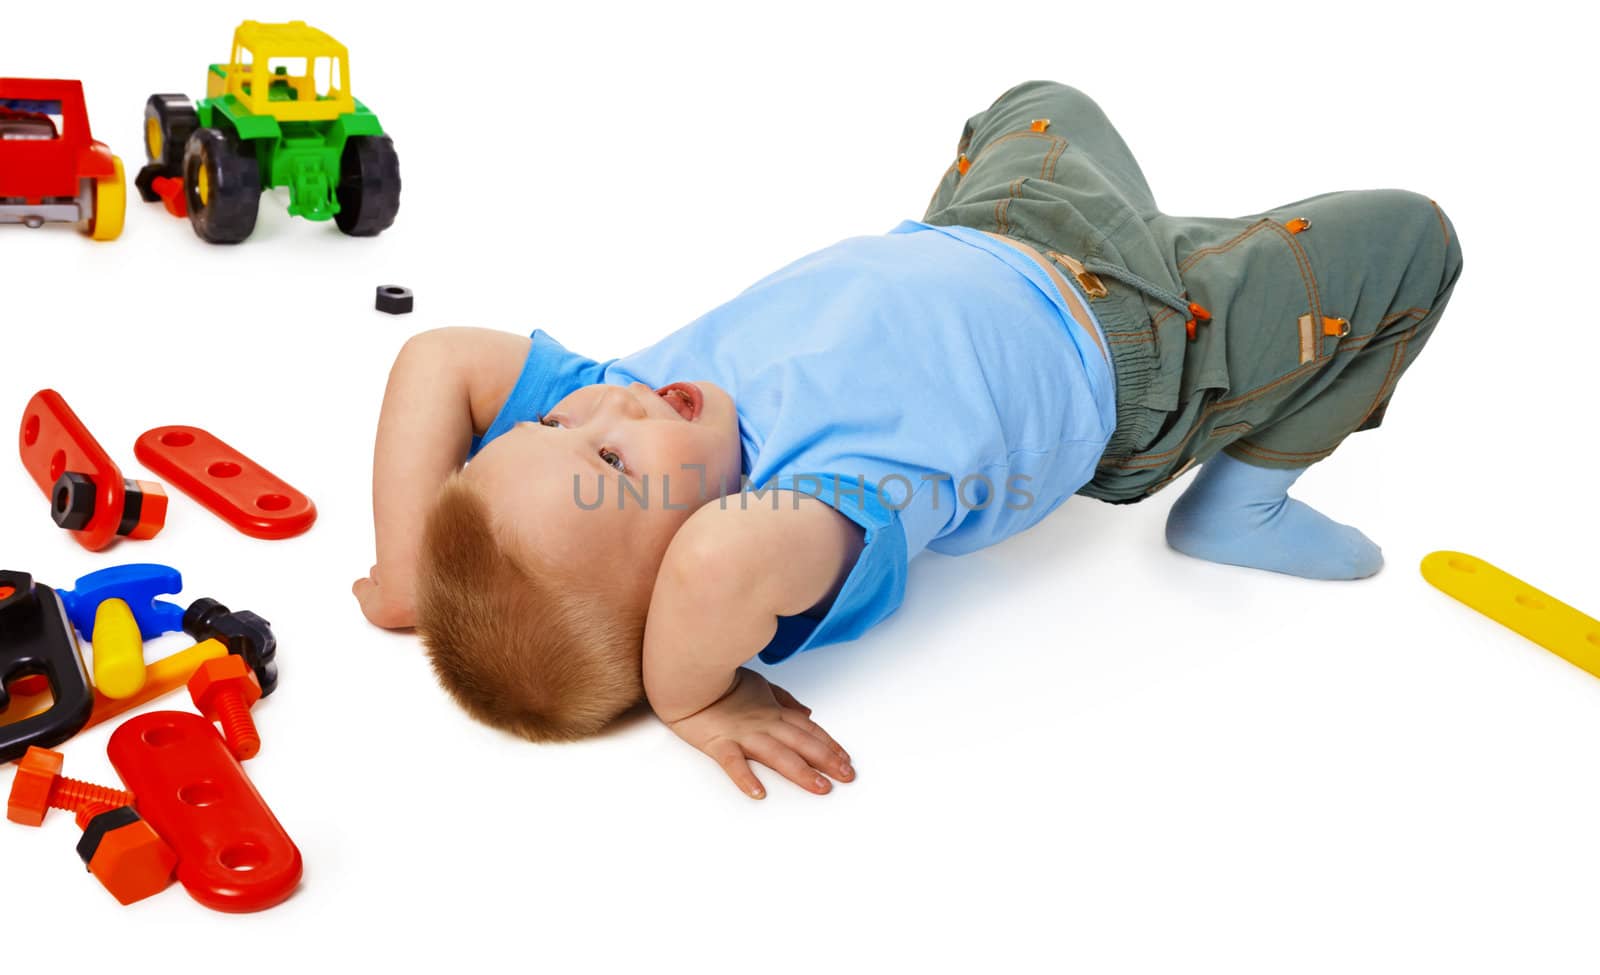 A little boy fooling around on the floor among the toys